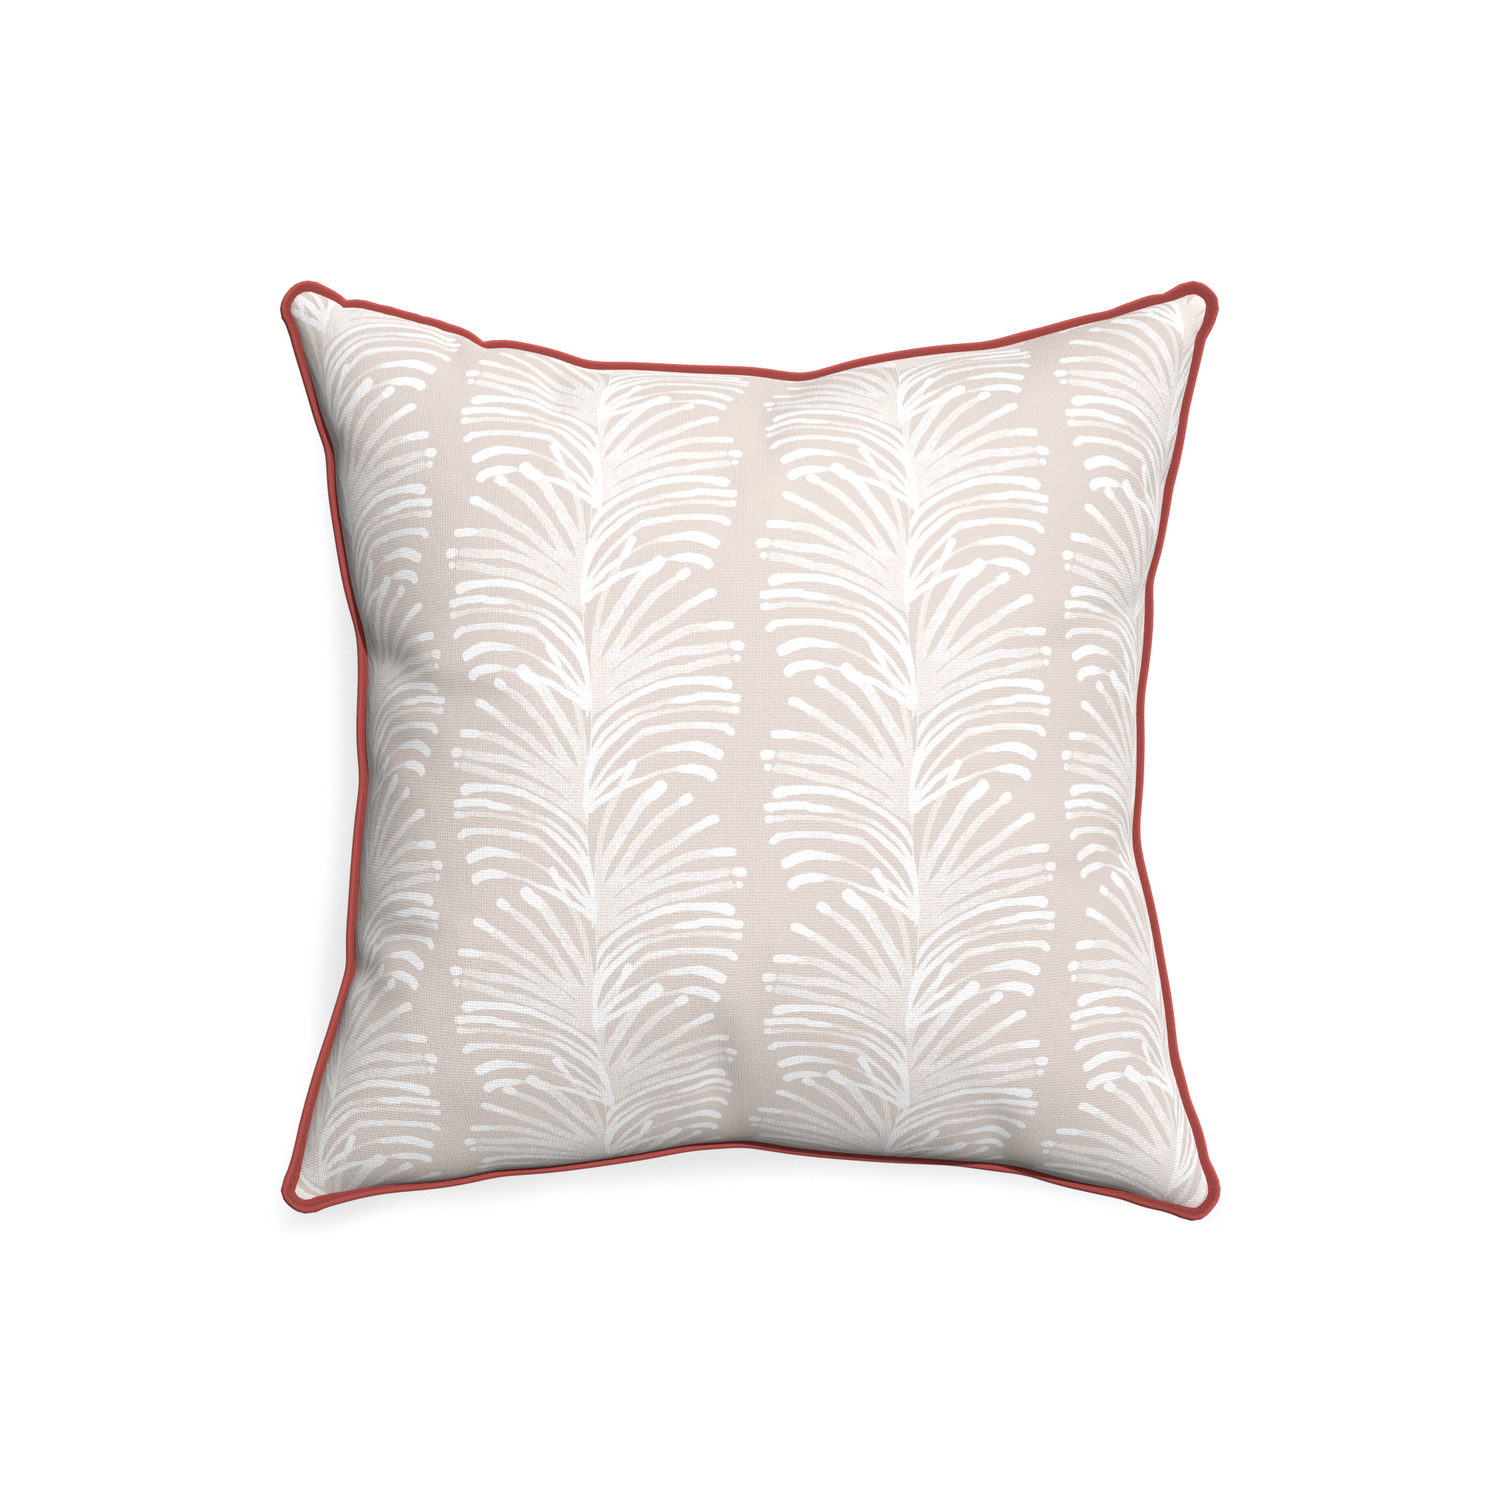 20-square emma sand custom pillow with c piping on white background